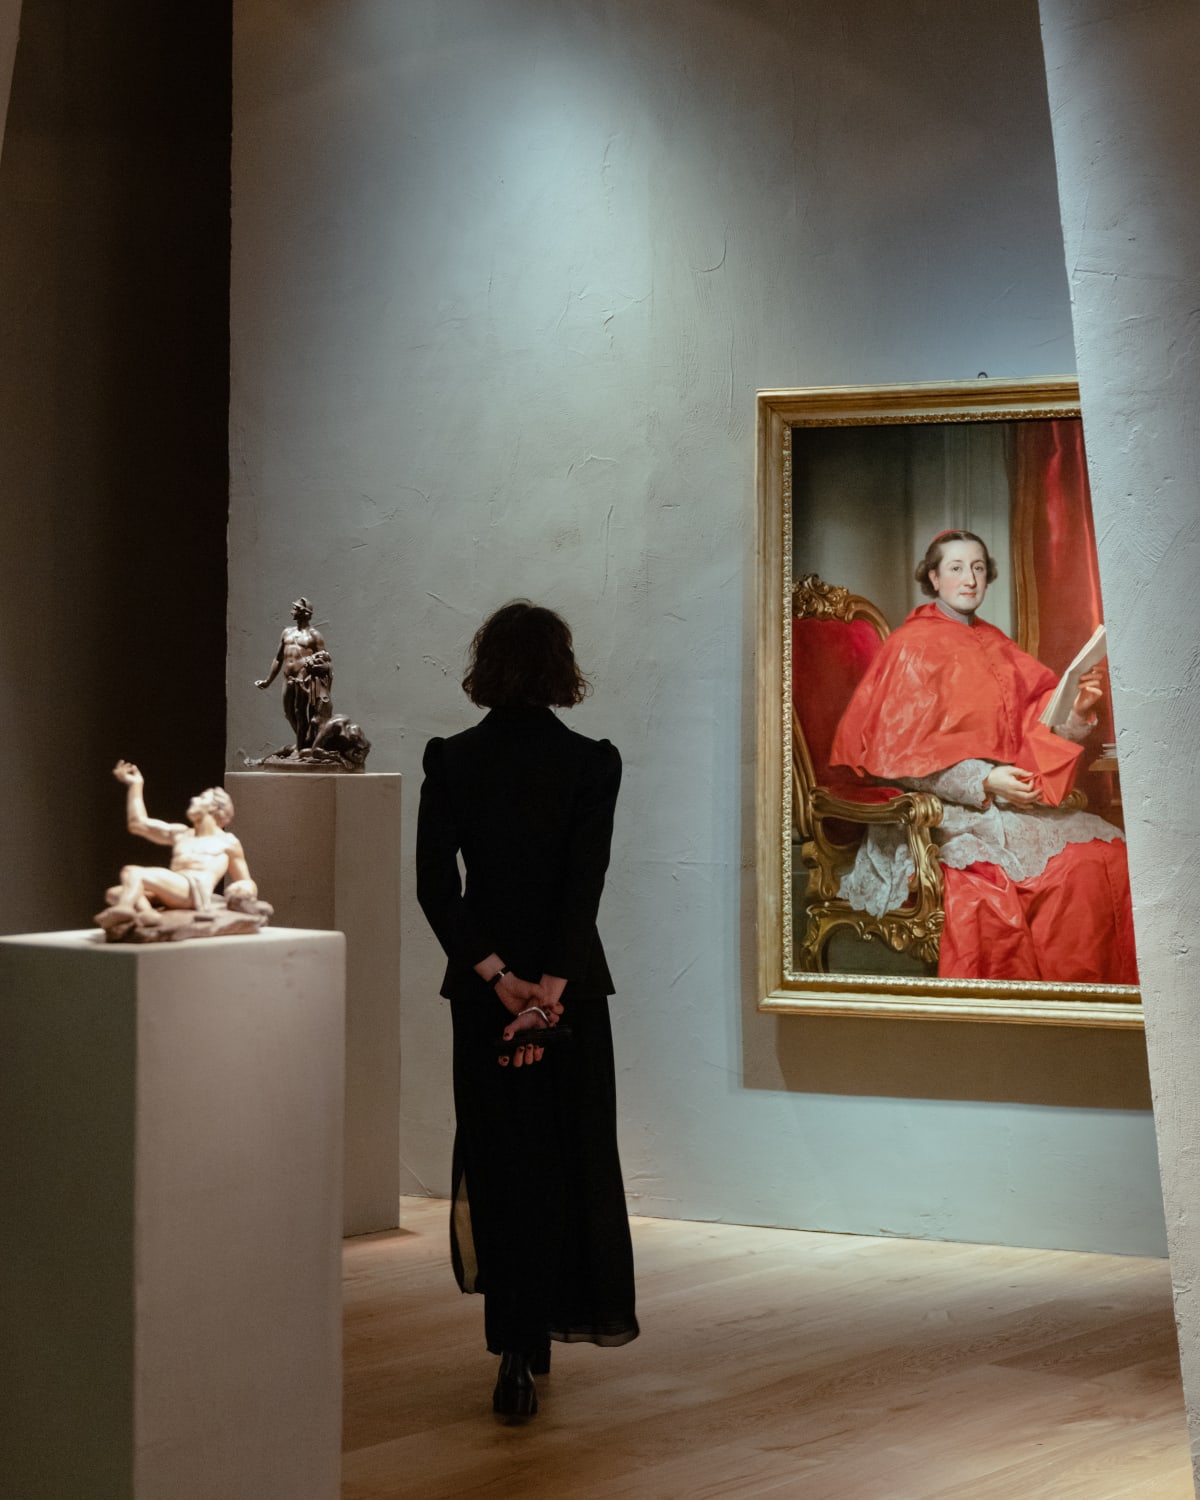 Photo by Alixe Lay, courtesy of TEFAF